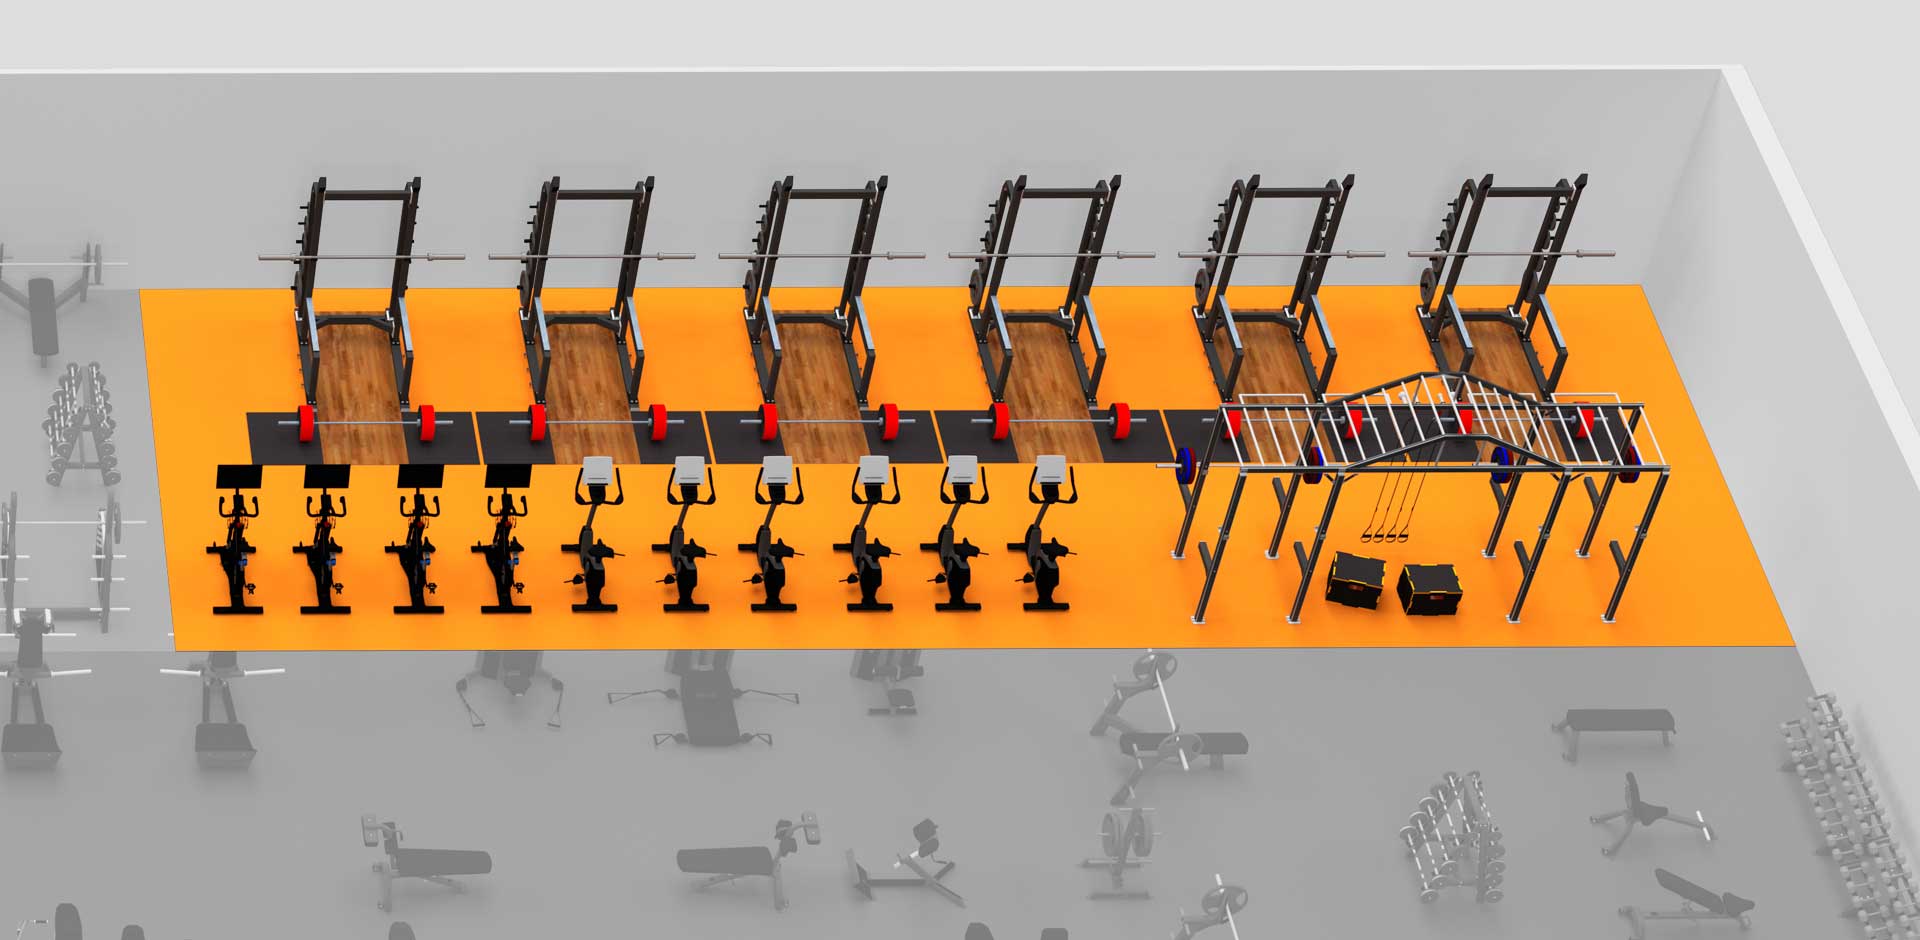 Weight lifting, functional cardio, functional zones in the hockey gym